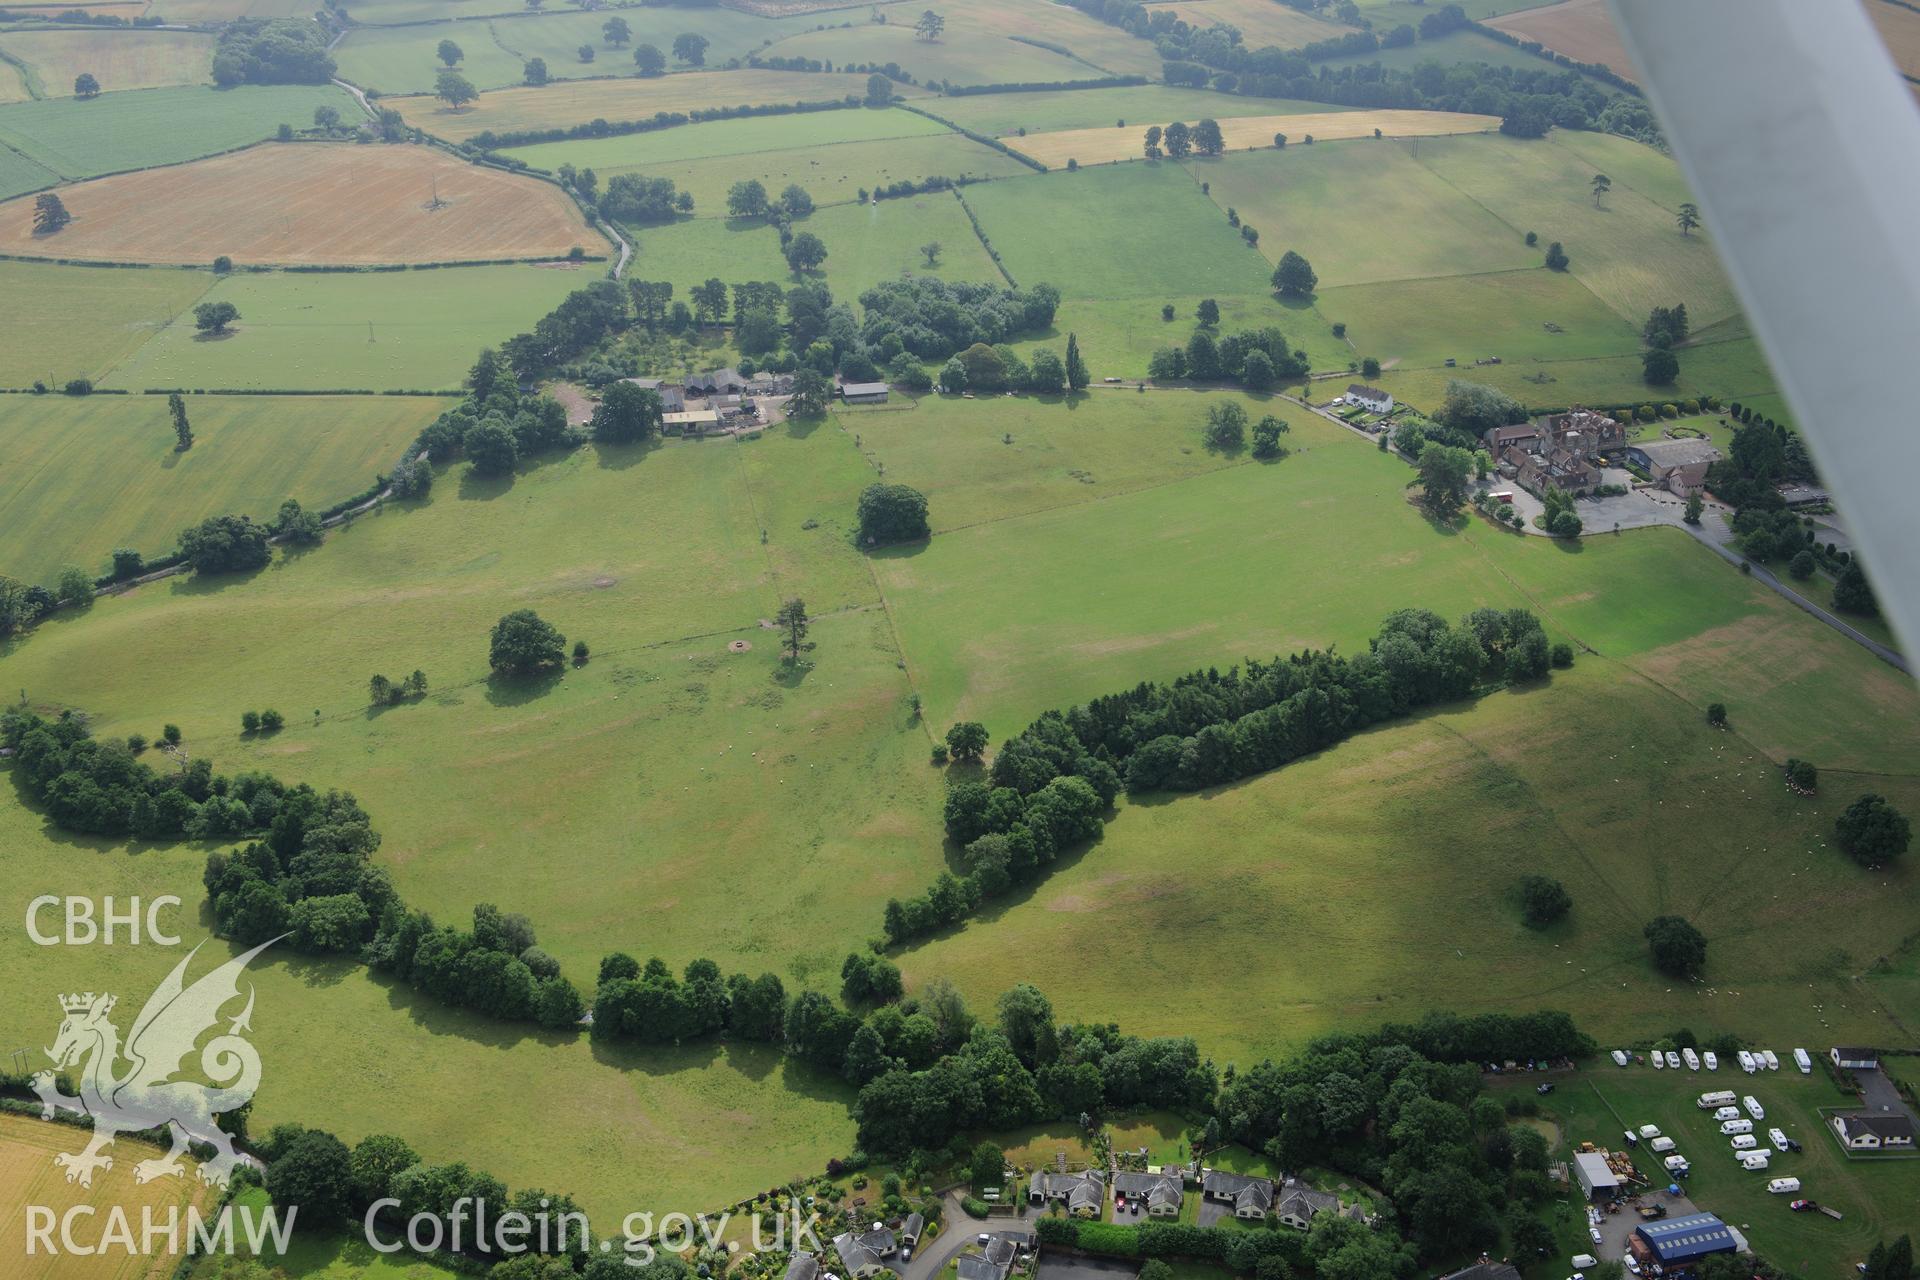 Grounds and gardens of Gwernyfed Park (including the former deer park); Gwernyfed Gaer defended enclosure, and Gwernyfed High School. Oblique aerial photograph taken during the Royal Commission?s programme of archaeological aerial reconnaissance by Toby Driver on 1st August 2013.